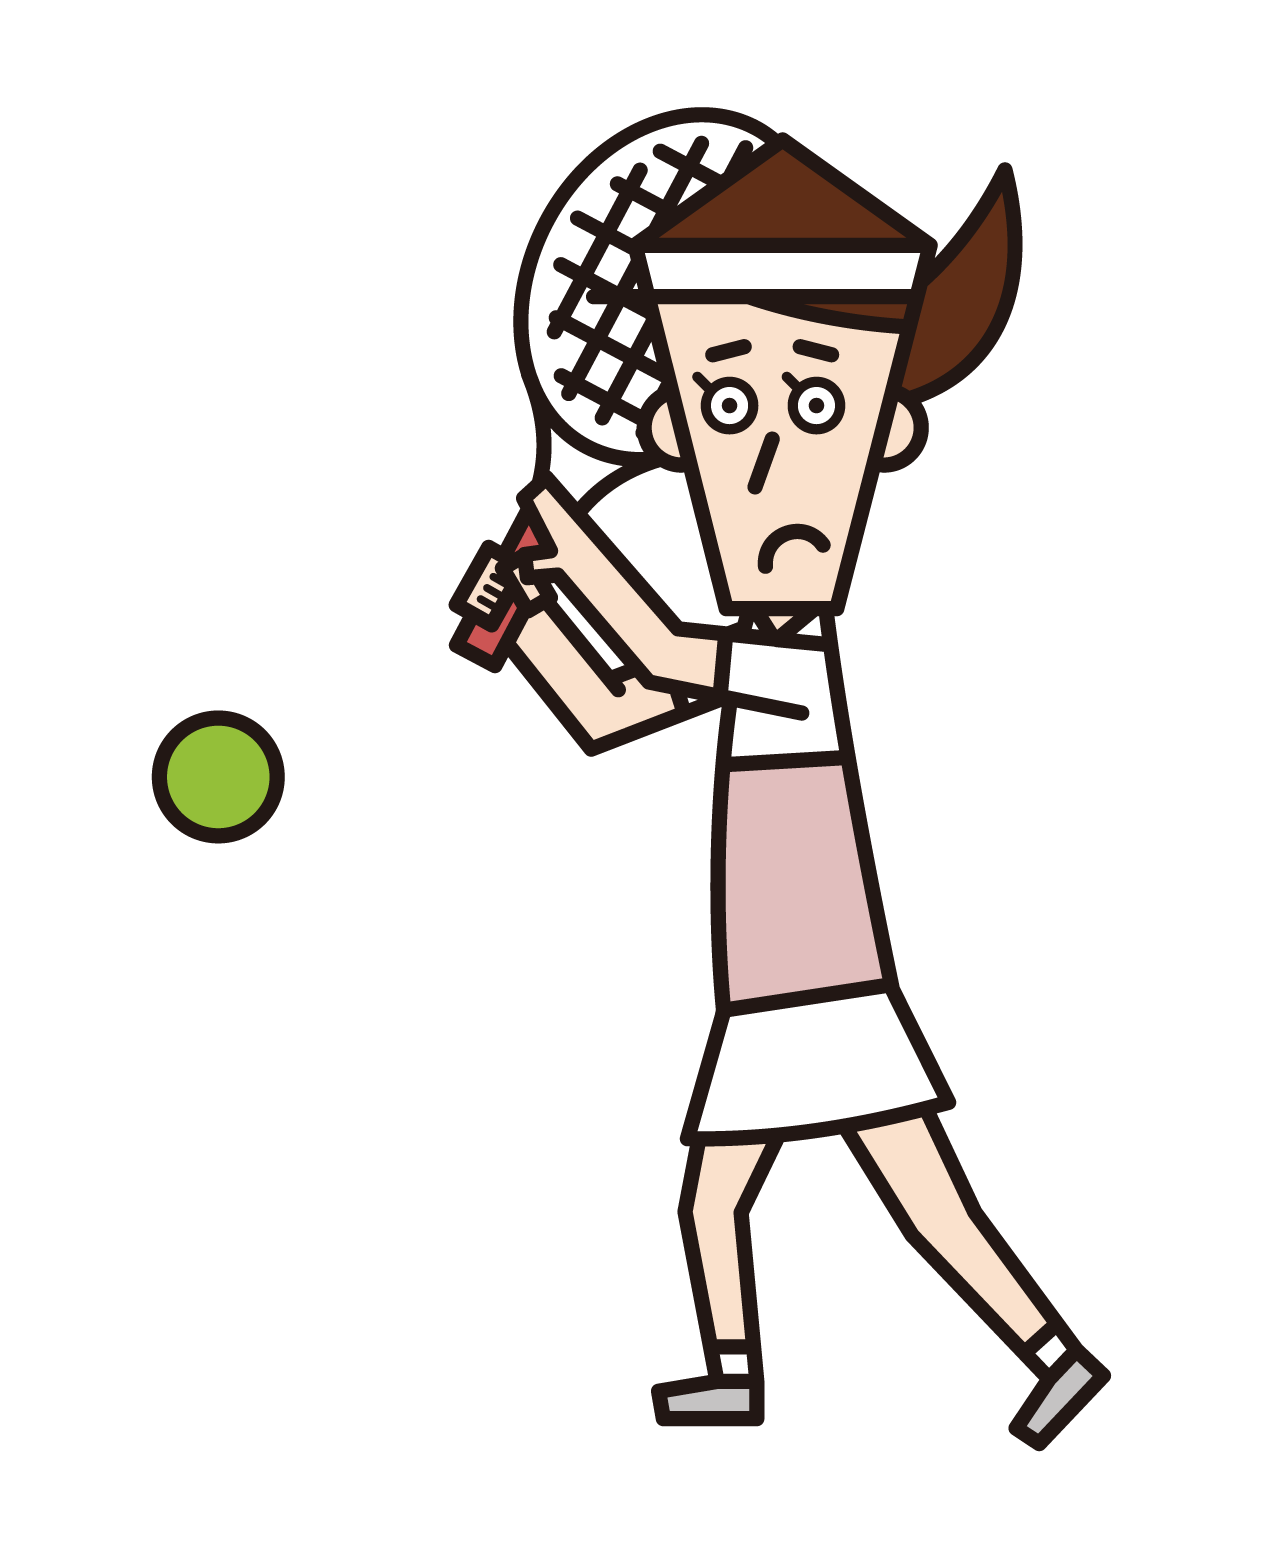 Illustration of a tennis player (female) hitting a ball